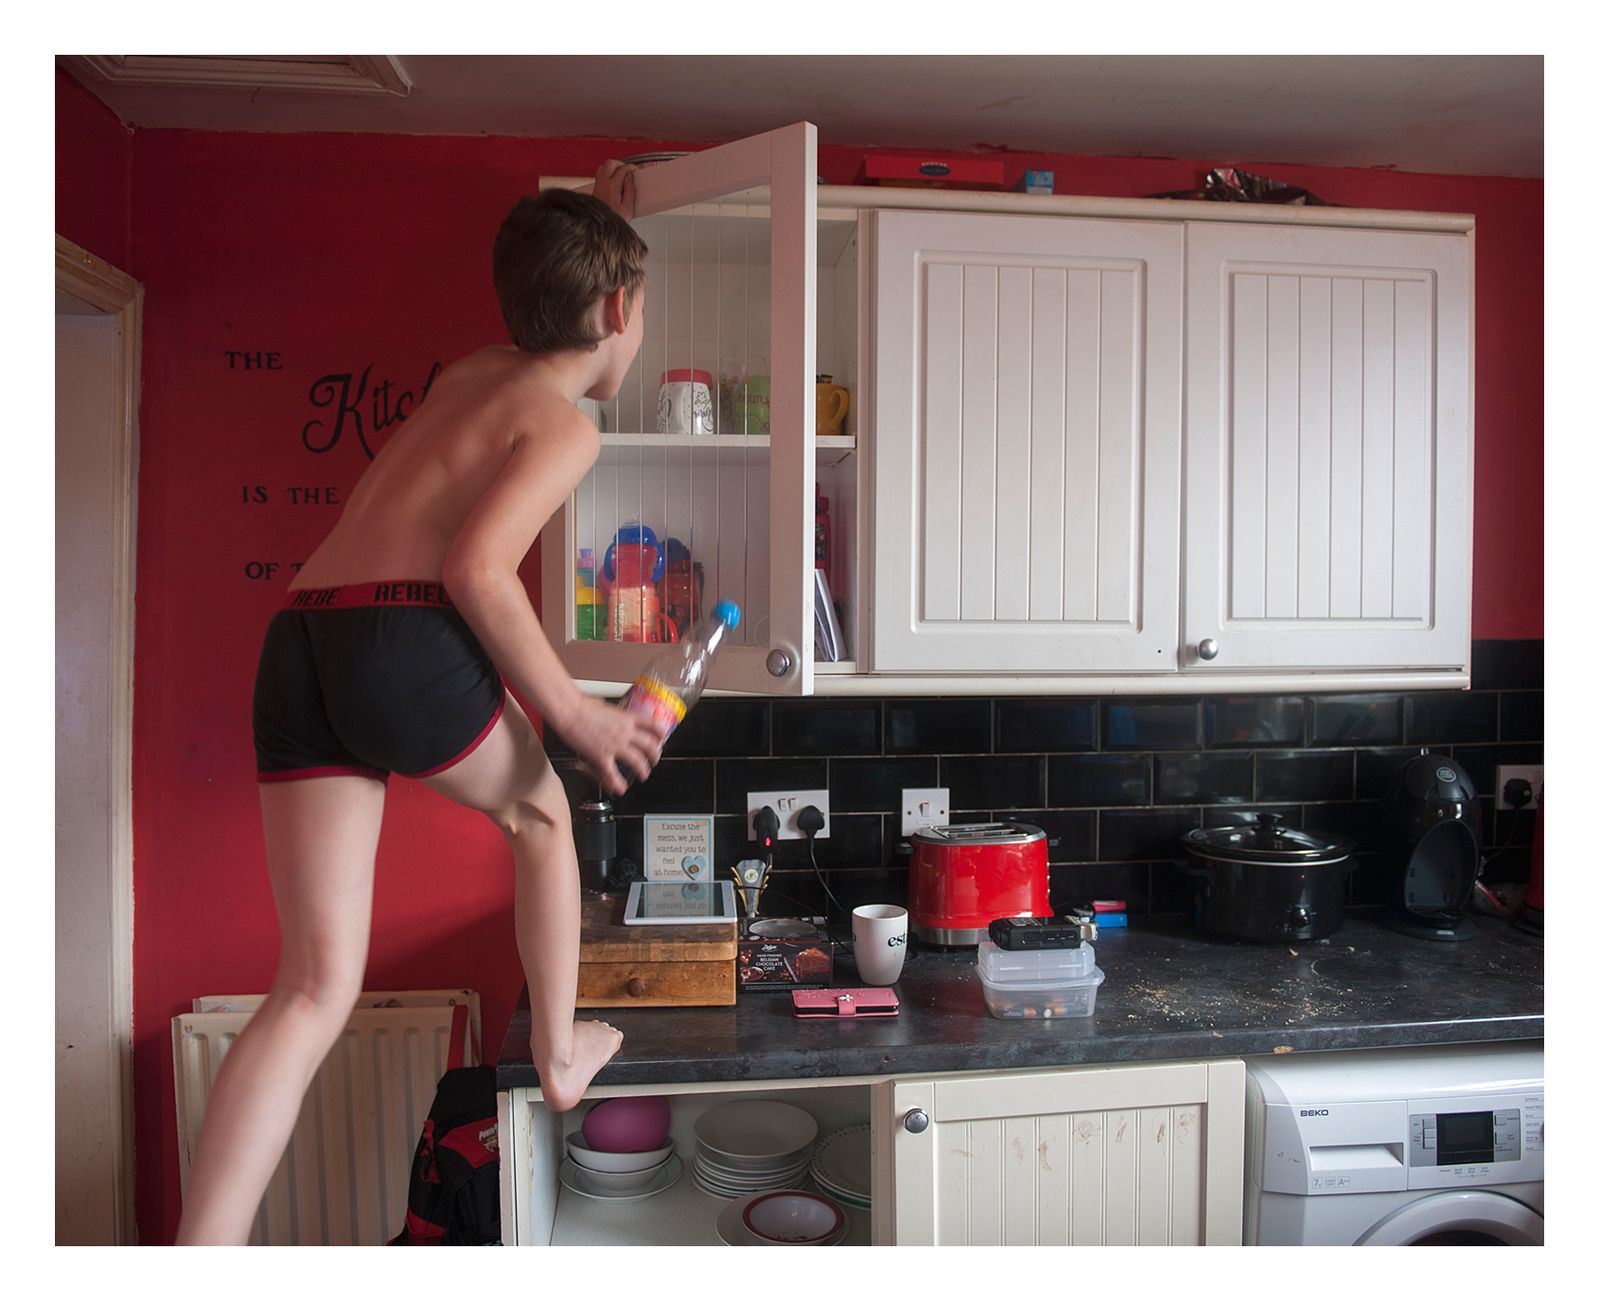 © Craig Easton - Image from the Thatcher's Children photography project